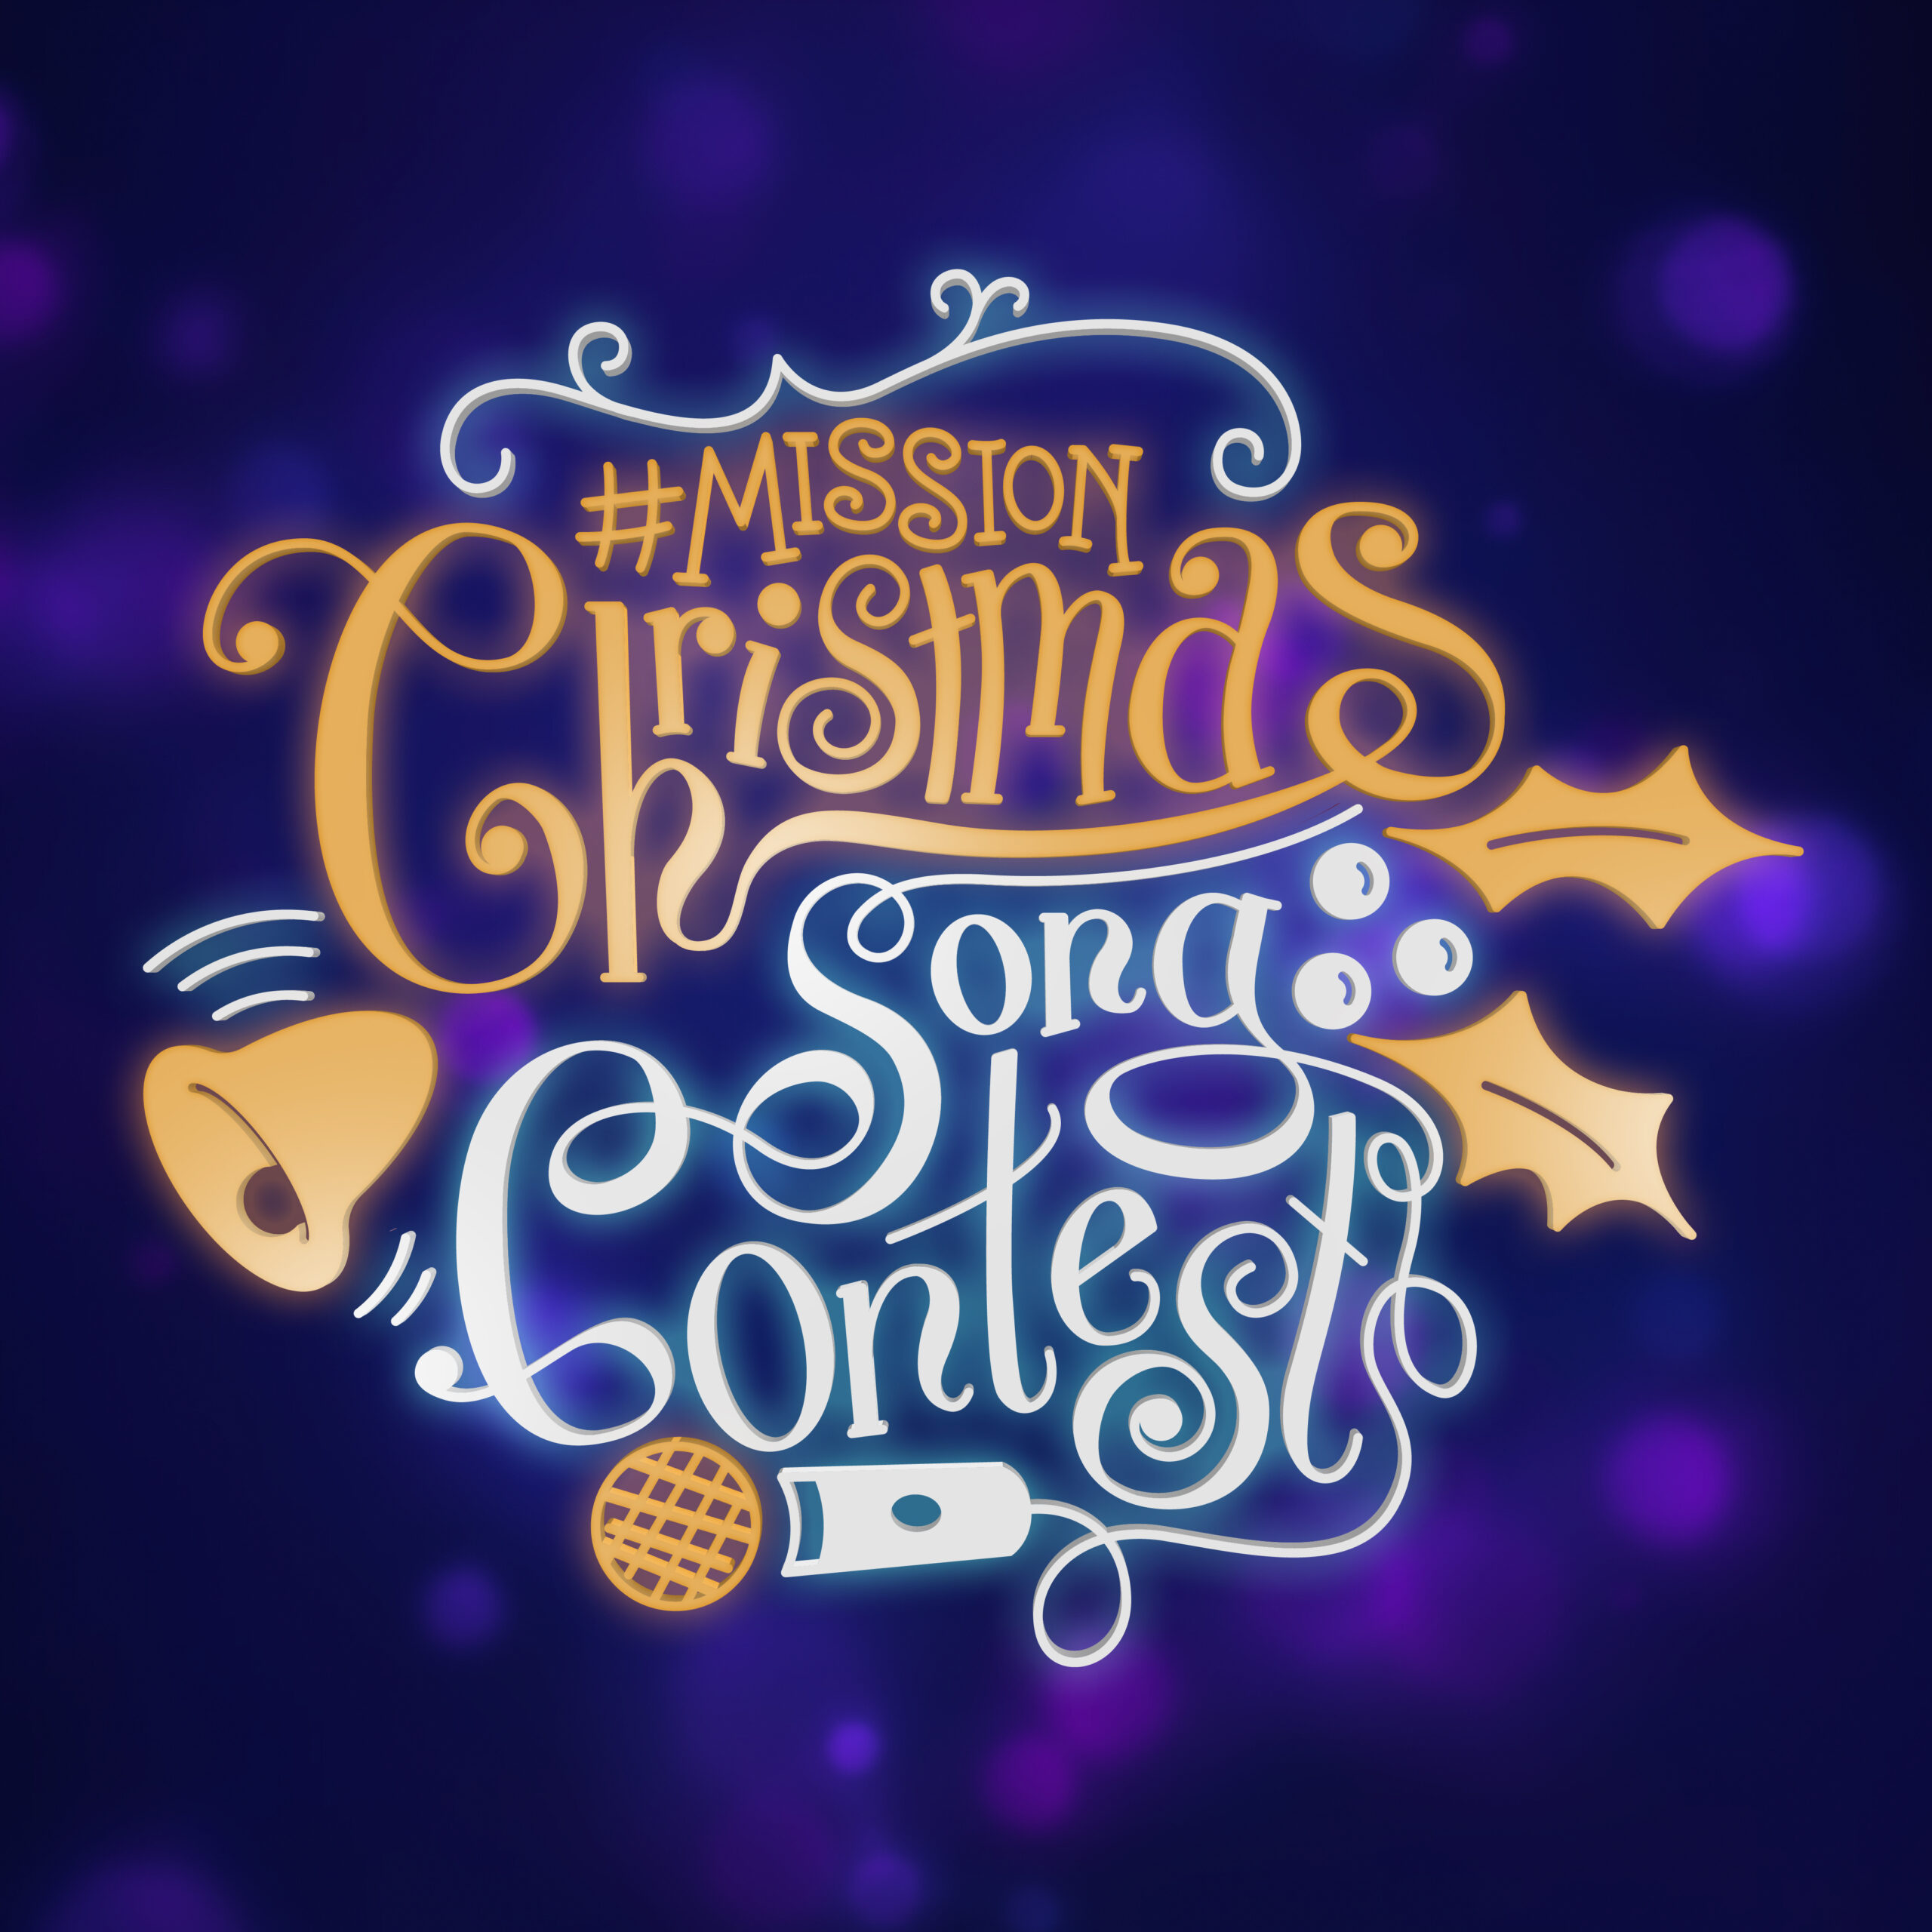 #MissionChristmas Song Contest Charity Video